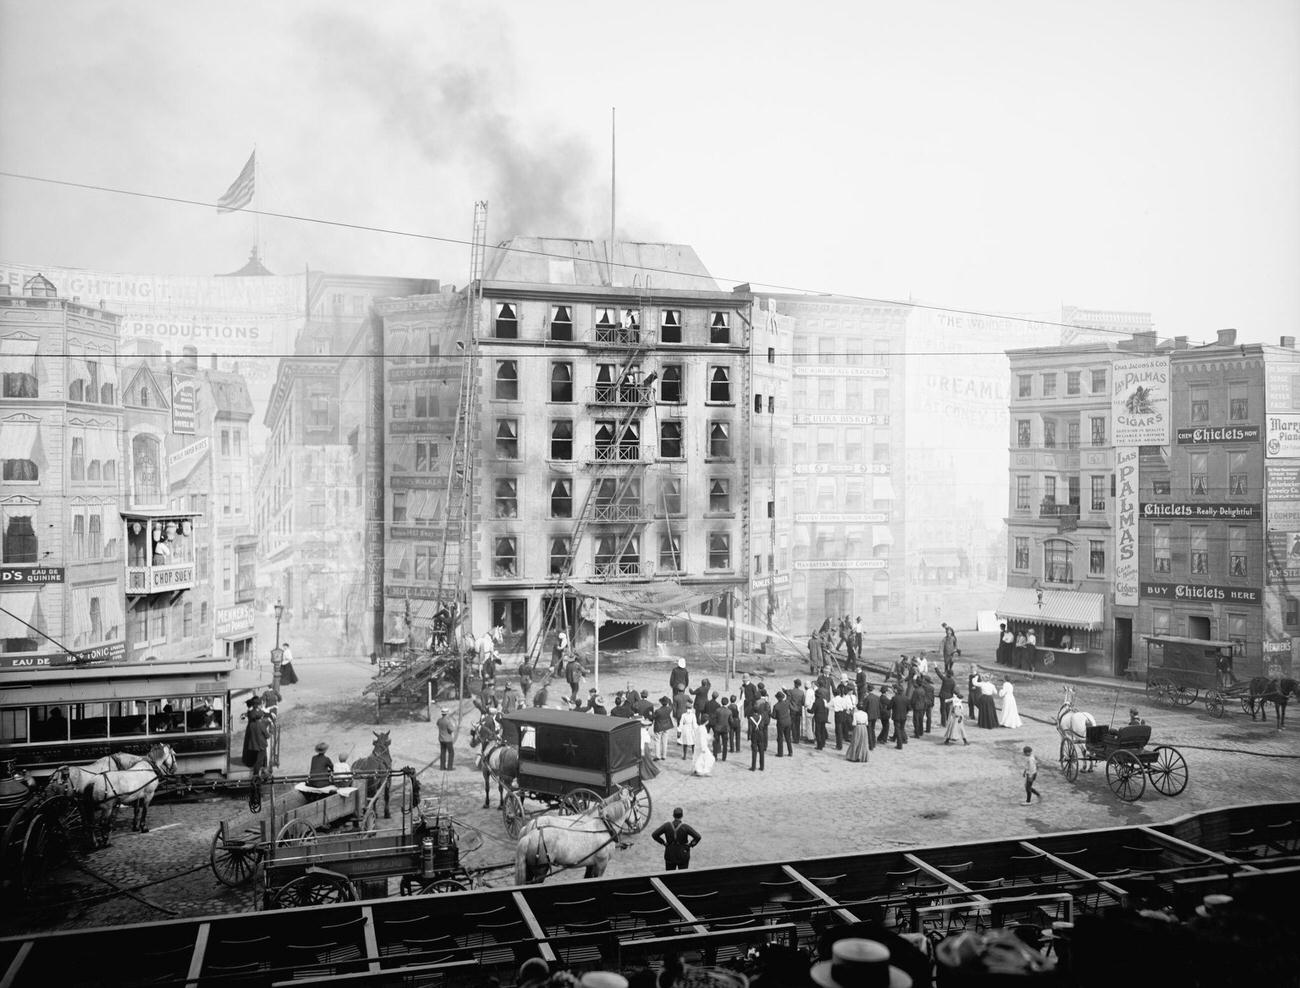 Firefighters At Work In Coney Island, Brooklyn, 1903